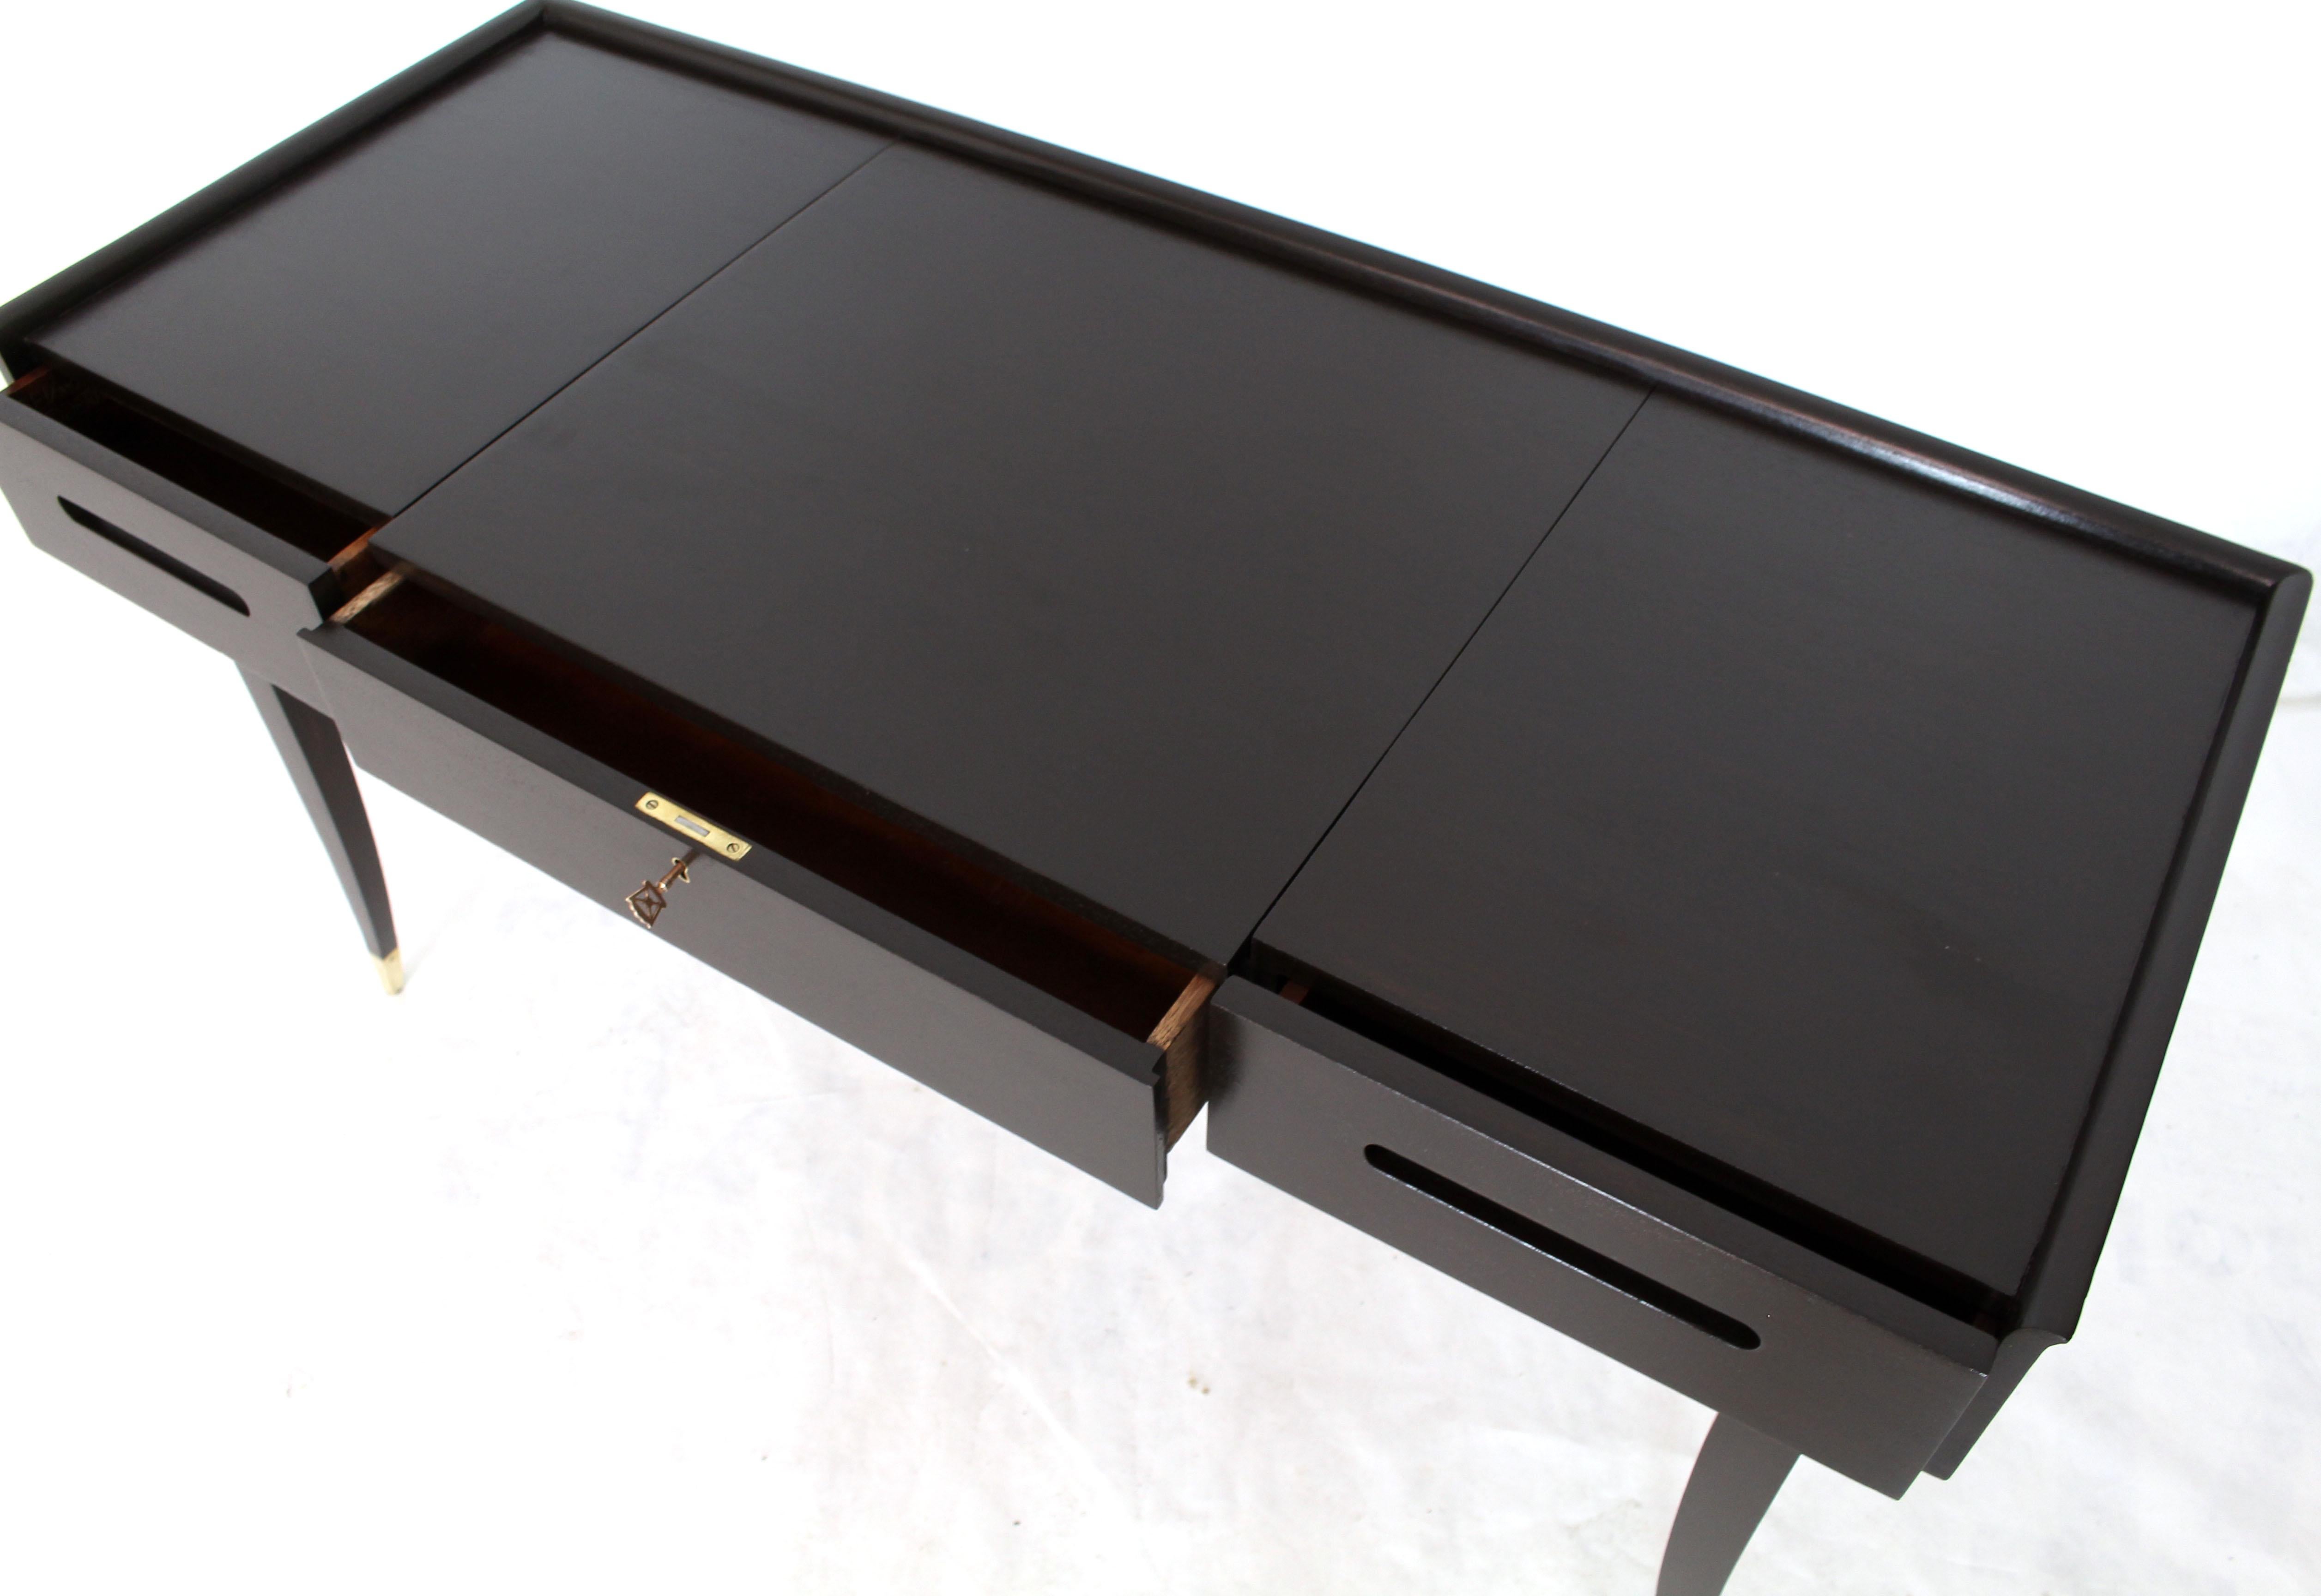 Mid-Century Modern solid mahogany writing table entry console table desk. All solid mahogany construction. Pull-out desk top with small secret compartment. Dark chocolate near ebonized finish. Standing on beautiful tapered saber legs with brass